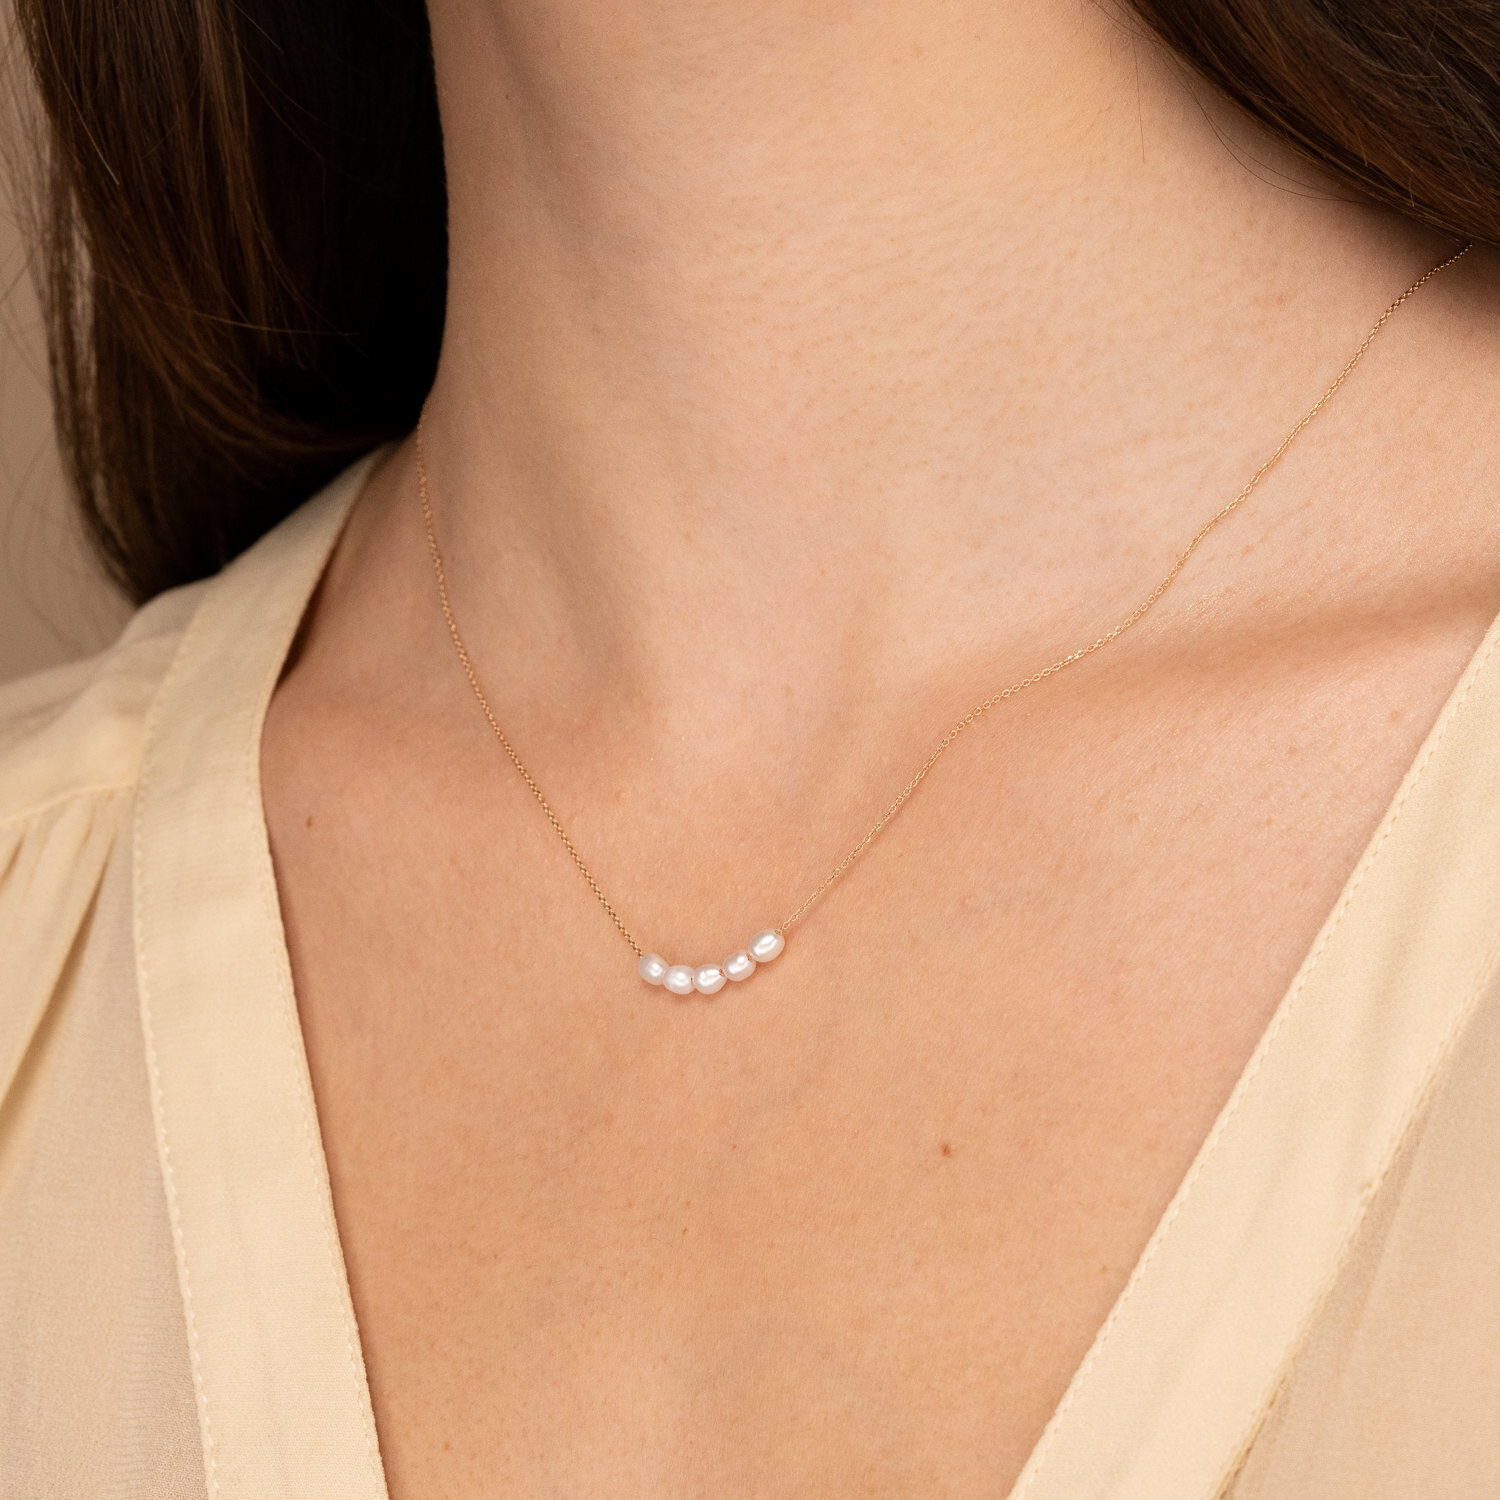 2019-08-12_CroissantDome-Product-Dainty_Organic_Pearl_Necklace-Close_Up.jpg